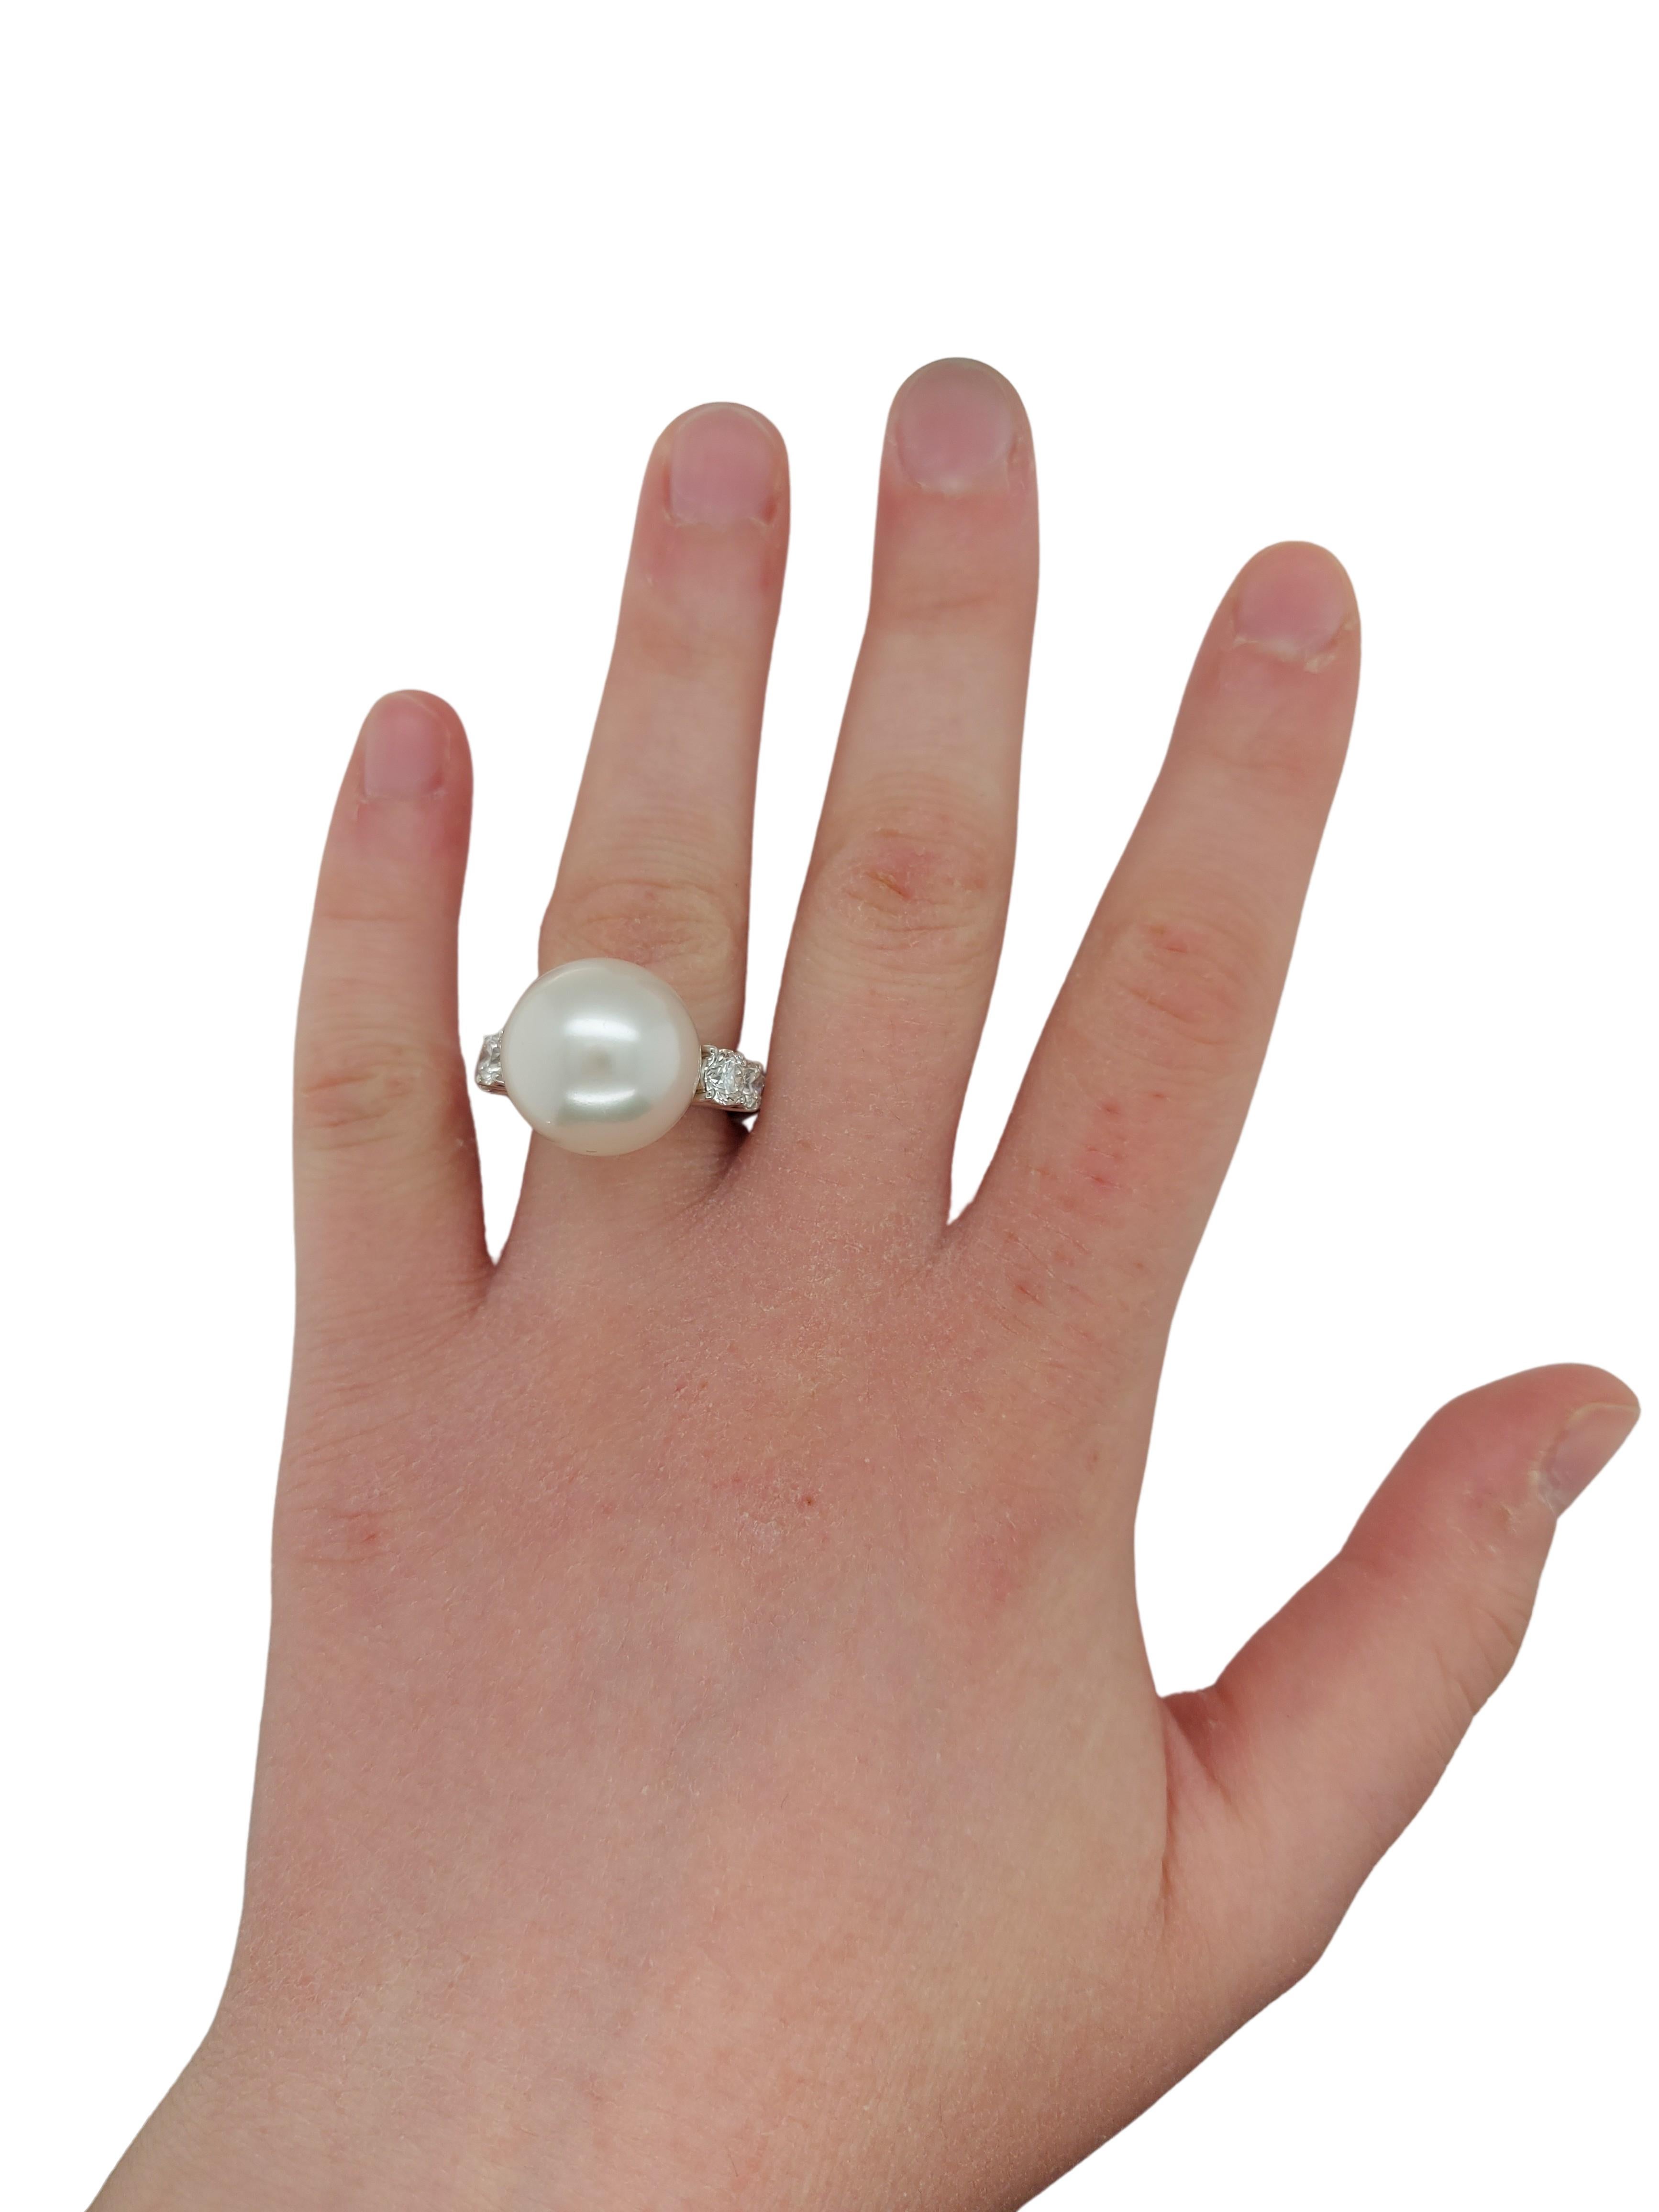 18kt White Gold Ring with 1.64 Carat Diamonds and a Big Pearl South Sea For Sale 7